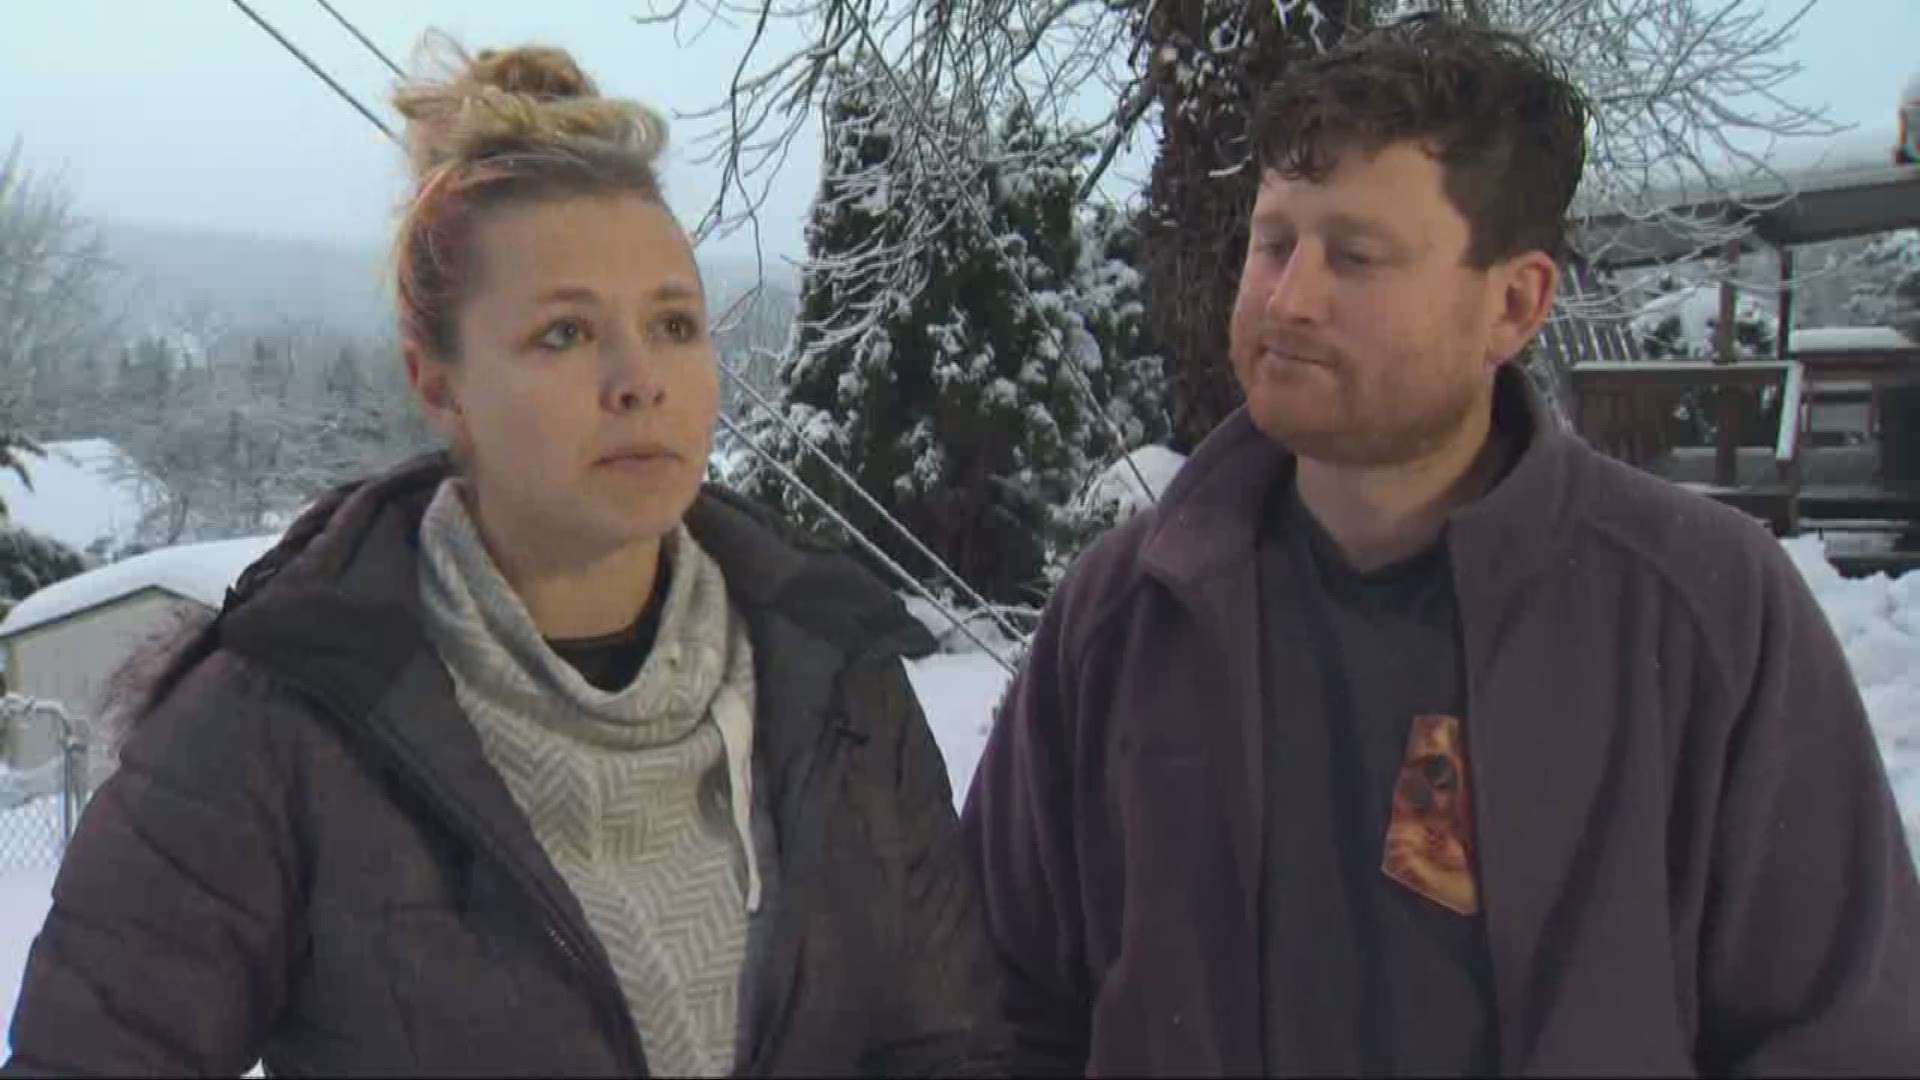 Jade and Quintin Stell were also caught in the traffic jam for three hours on Tuesday night, but they managed to make it home. When they woke up Wednesday morning and learned other people were not as lucky, they knew they had to do something.